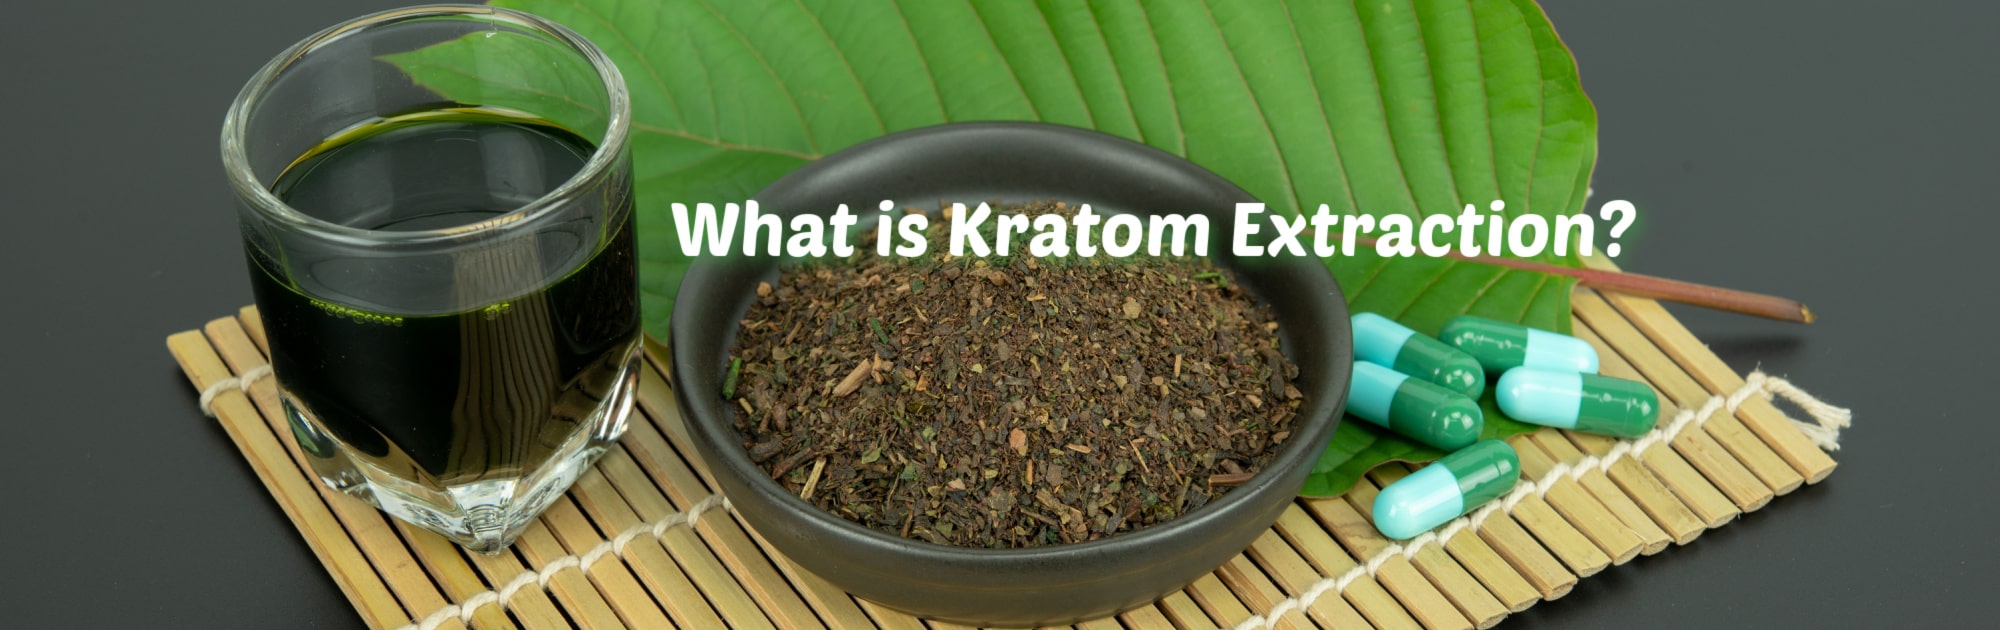 image of what is kratom extraction